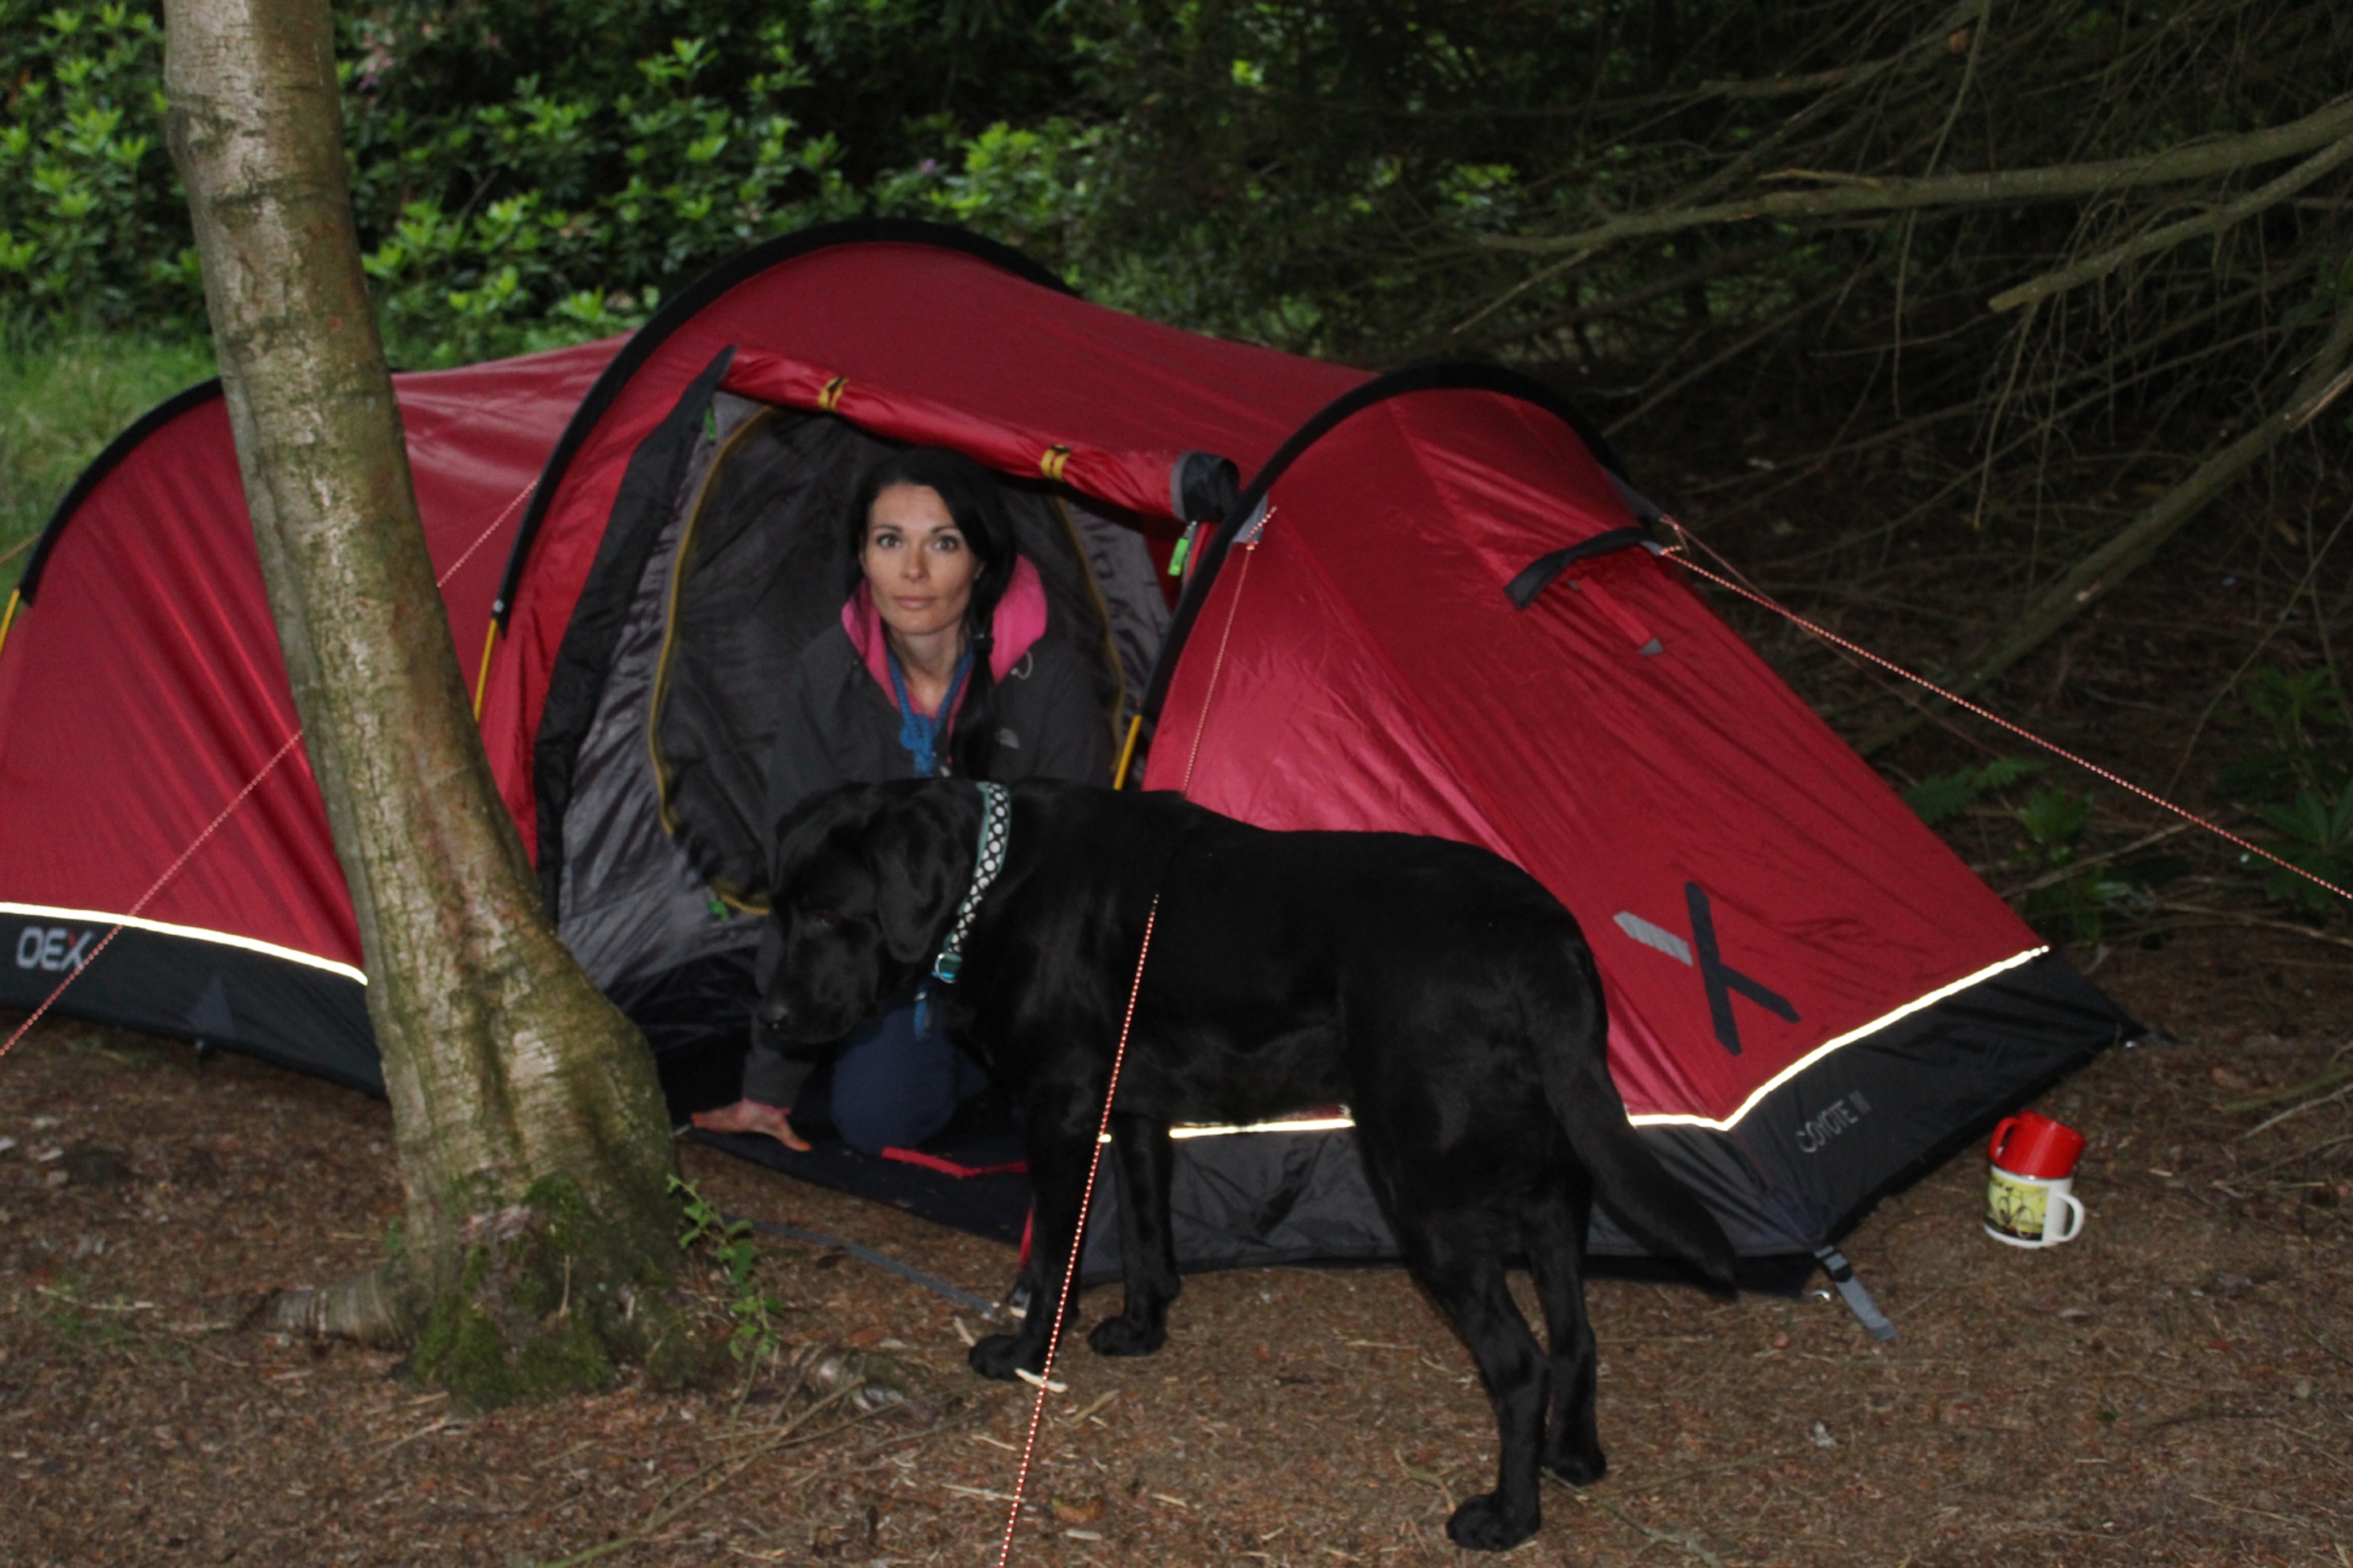 Gayle Ritchie and her dog Toby enjoy wild camping on the banks of Loch of Lintrathen.